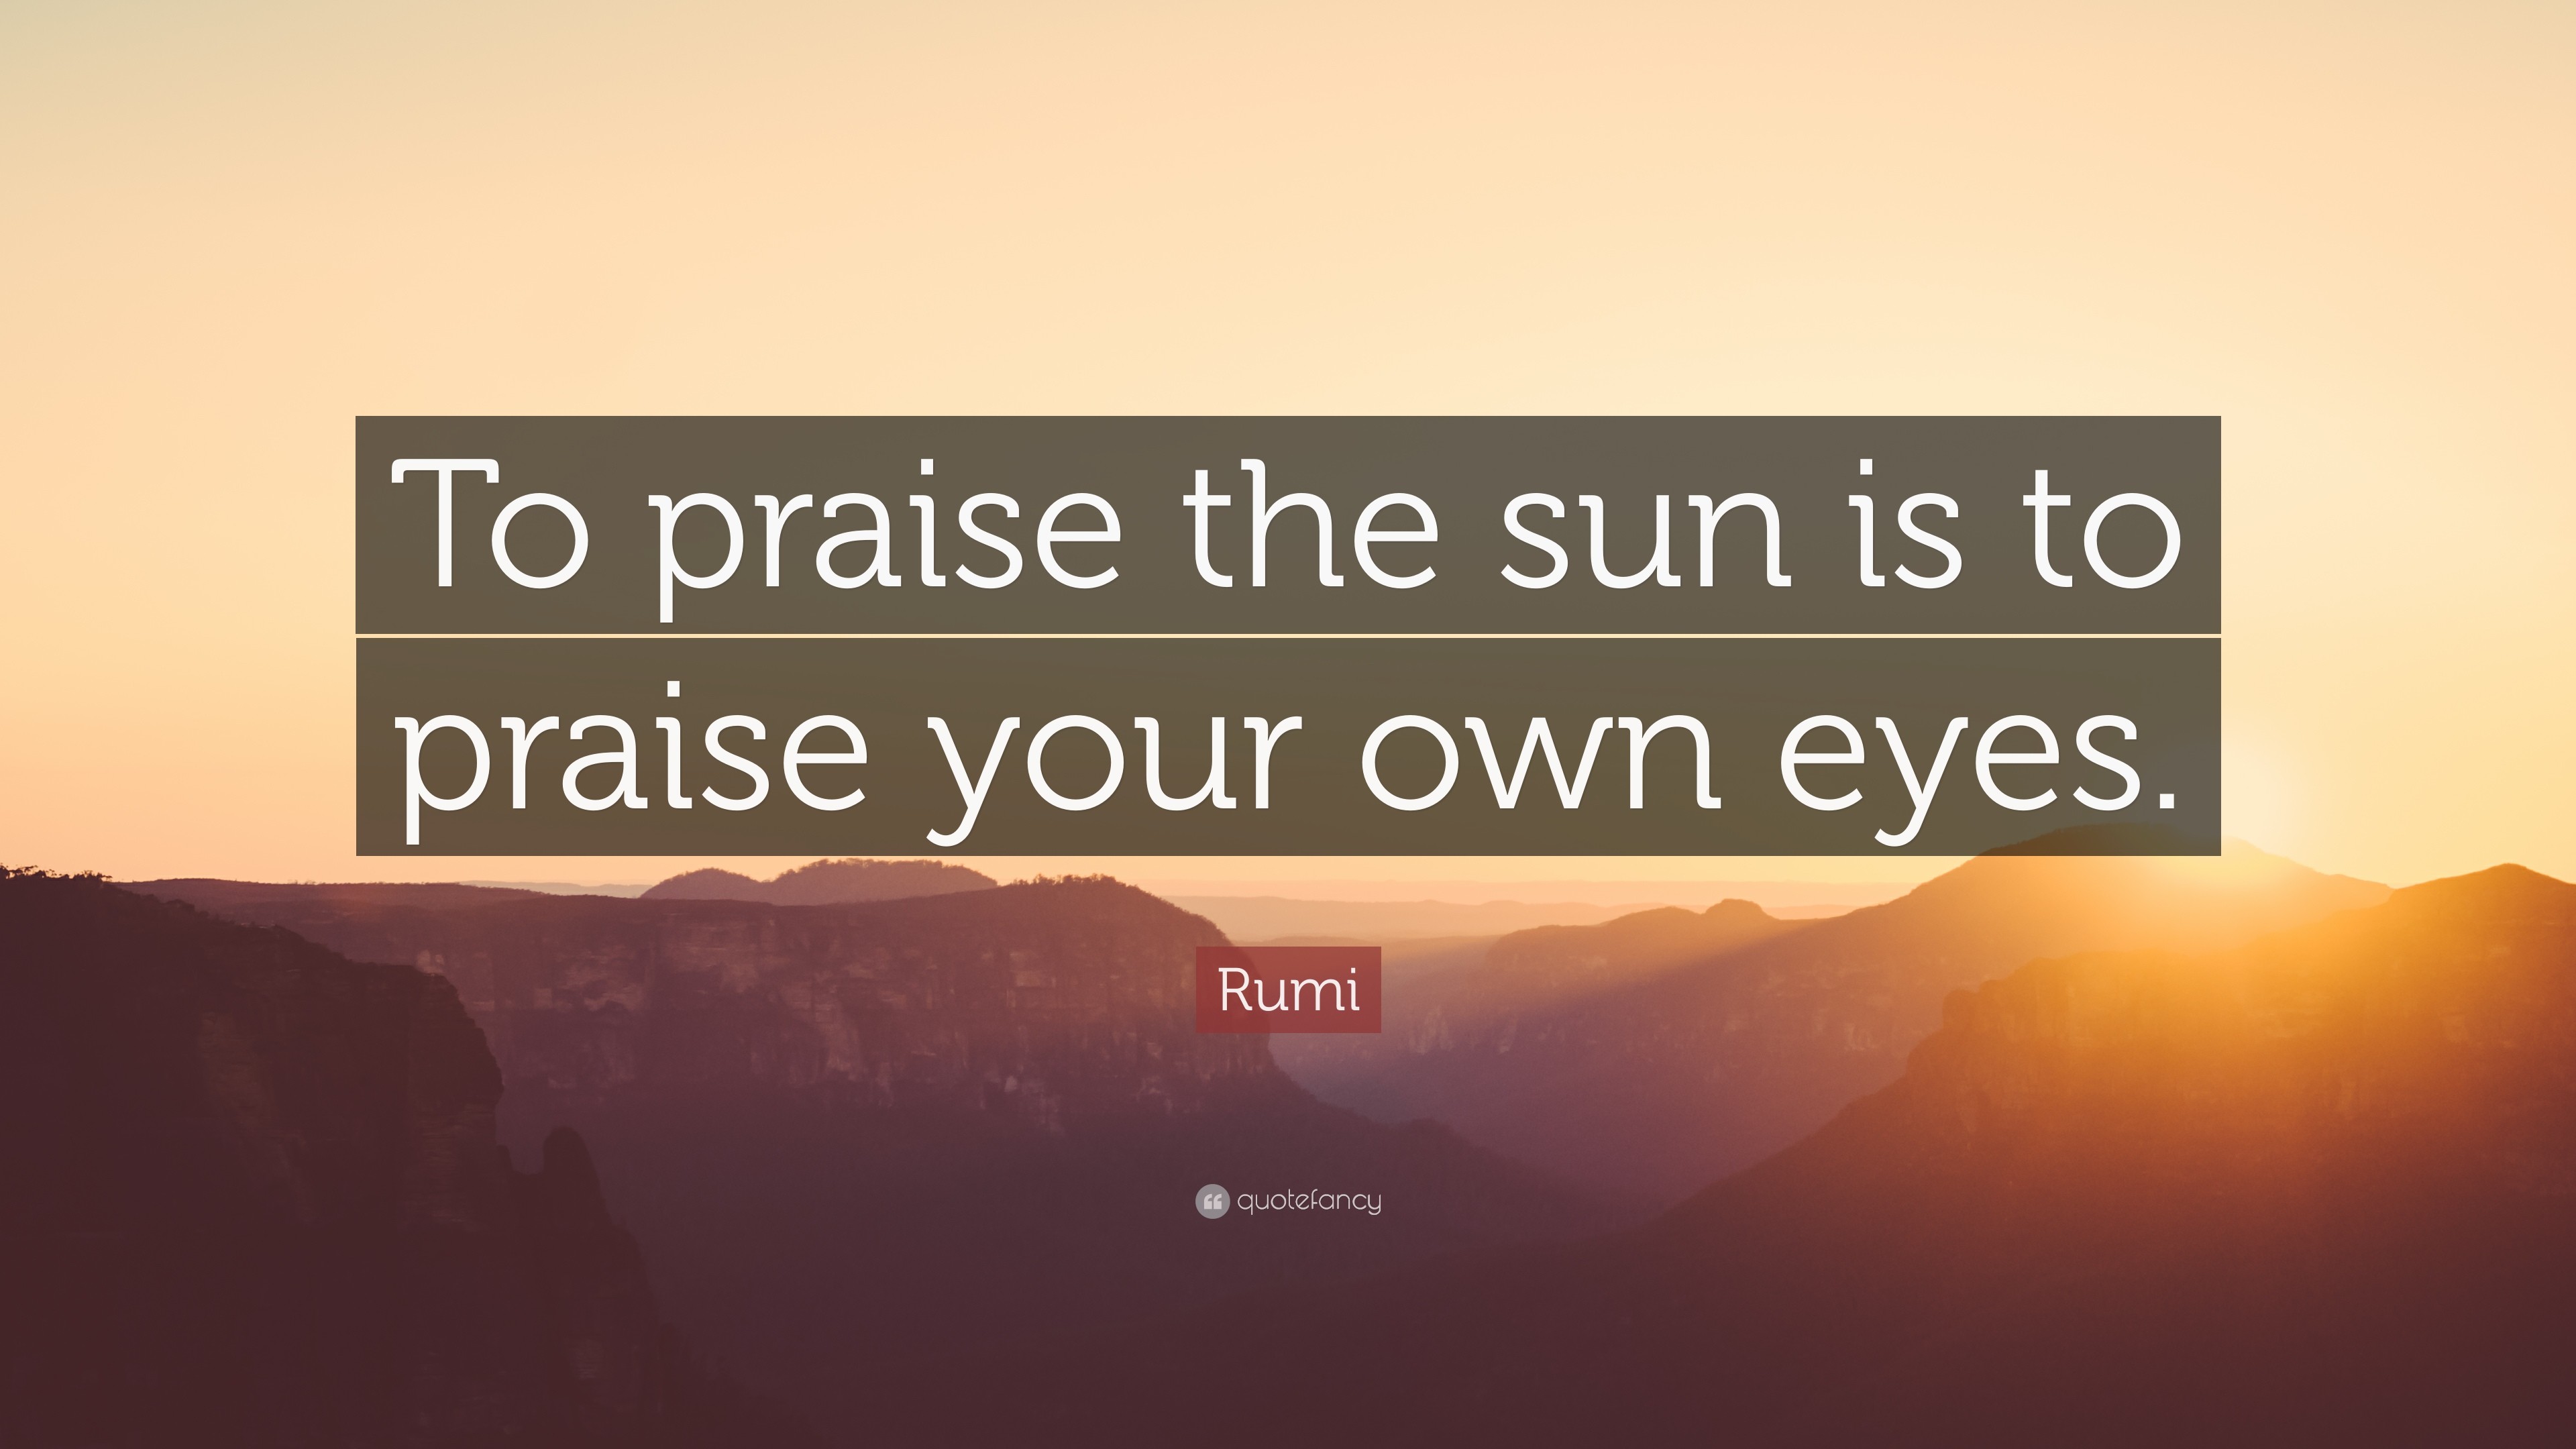 3840x2160 Rumi Quote: “To praise the sun is to praise your own eyes.”